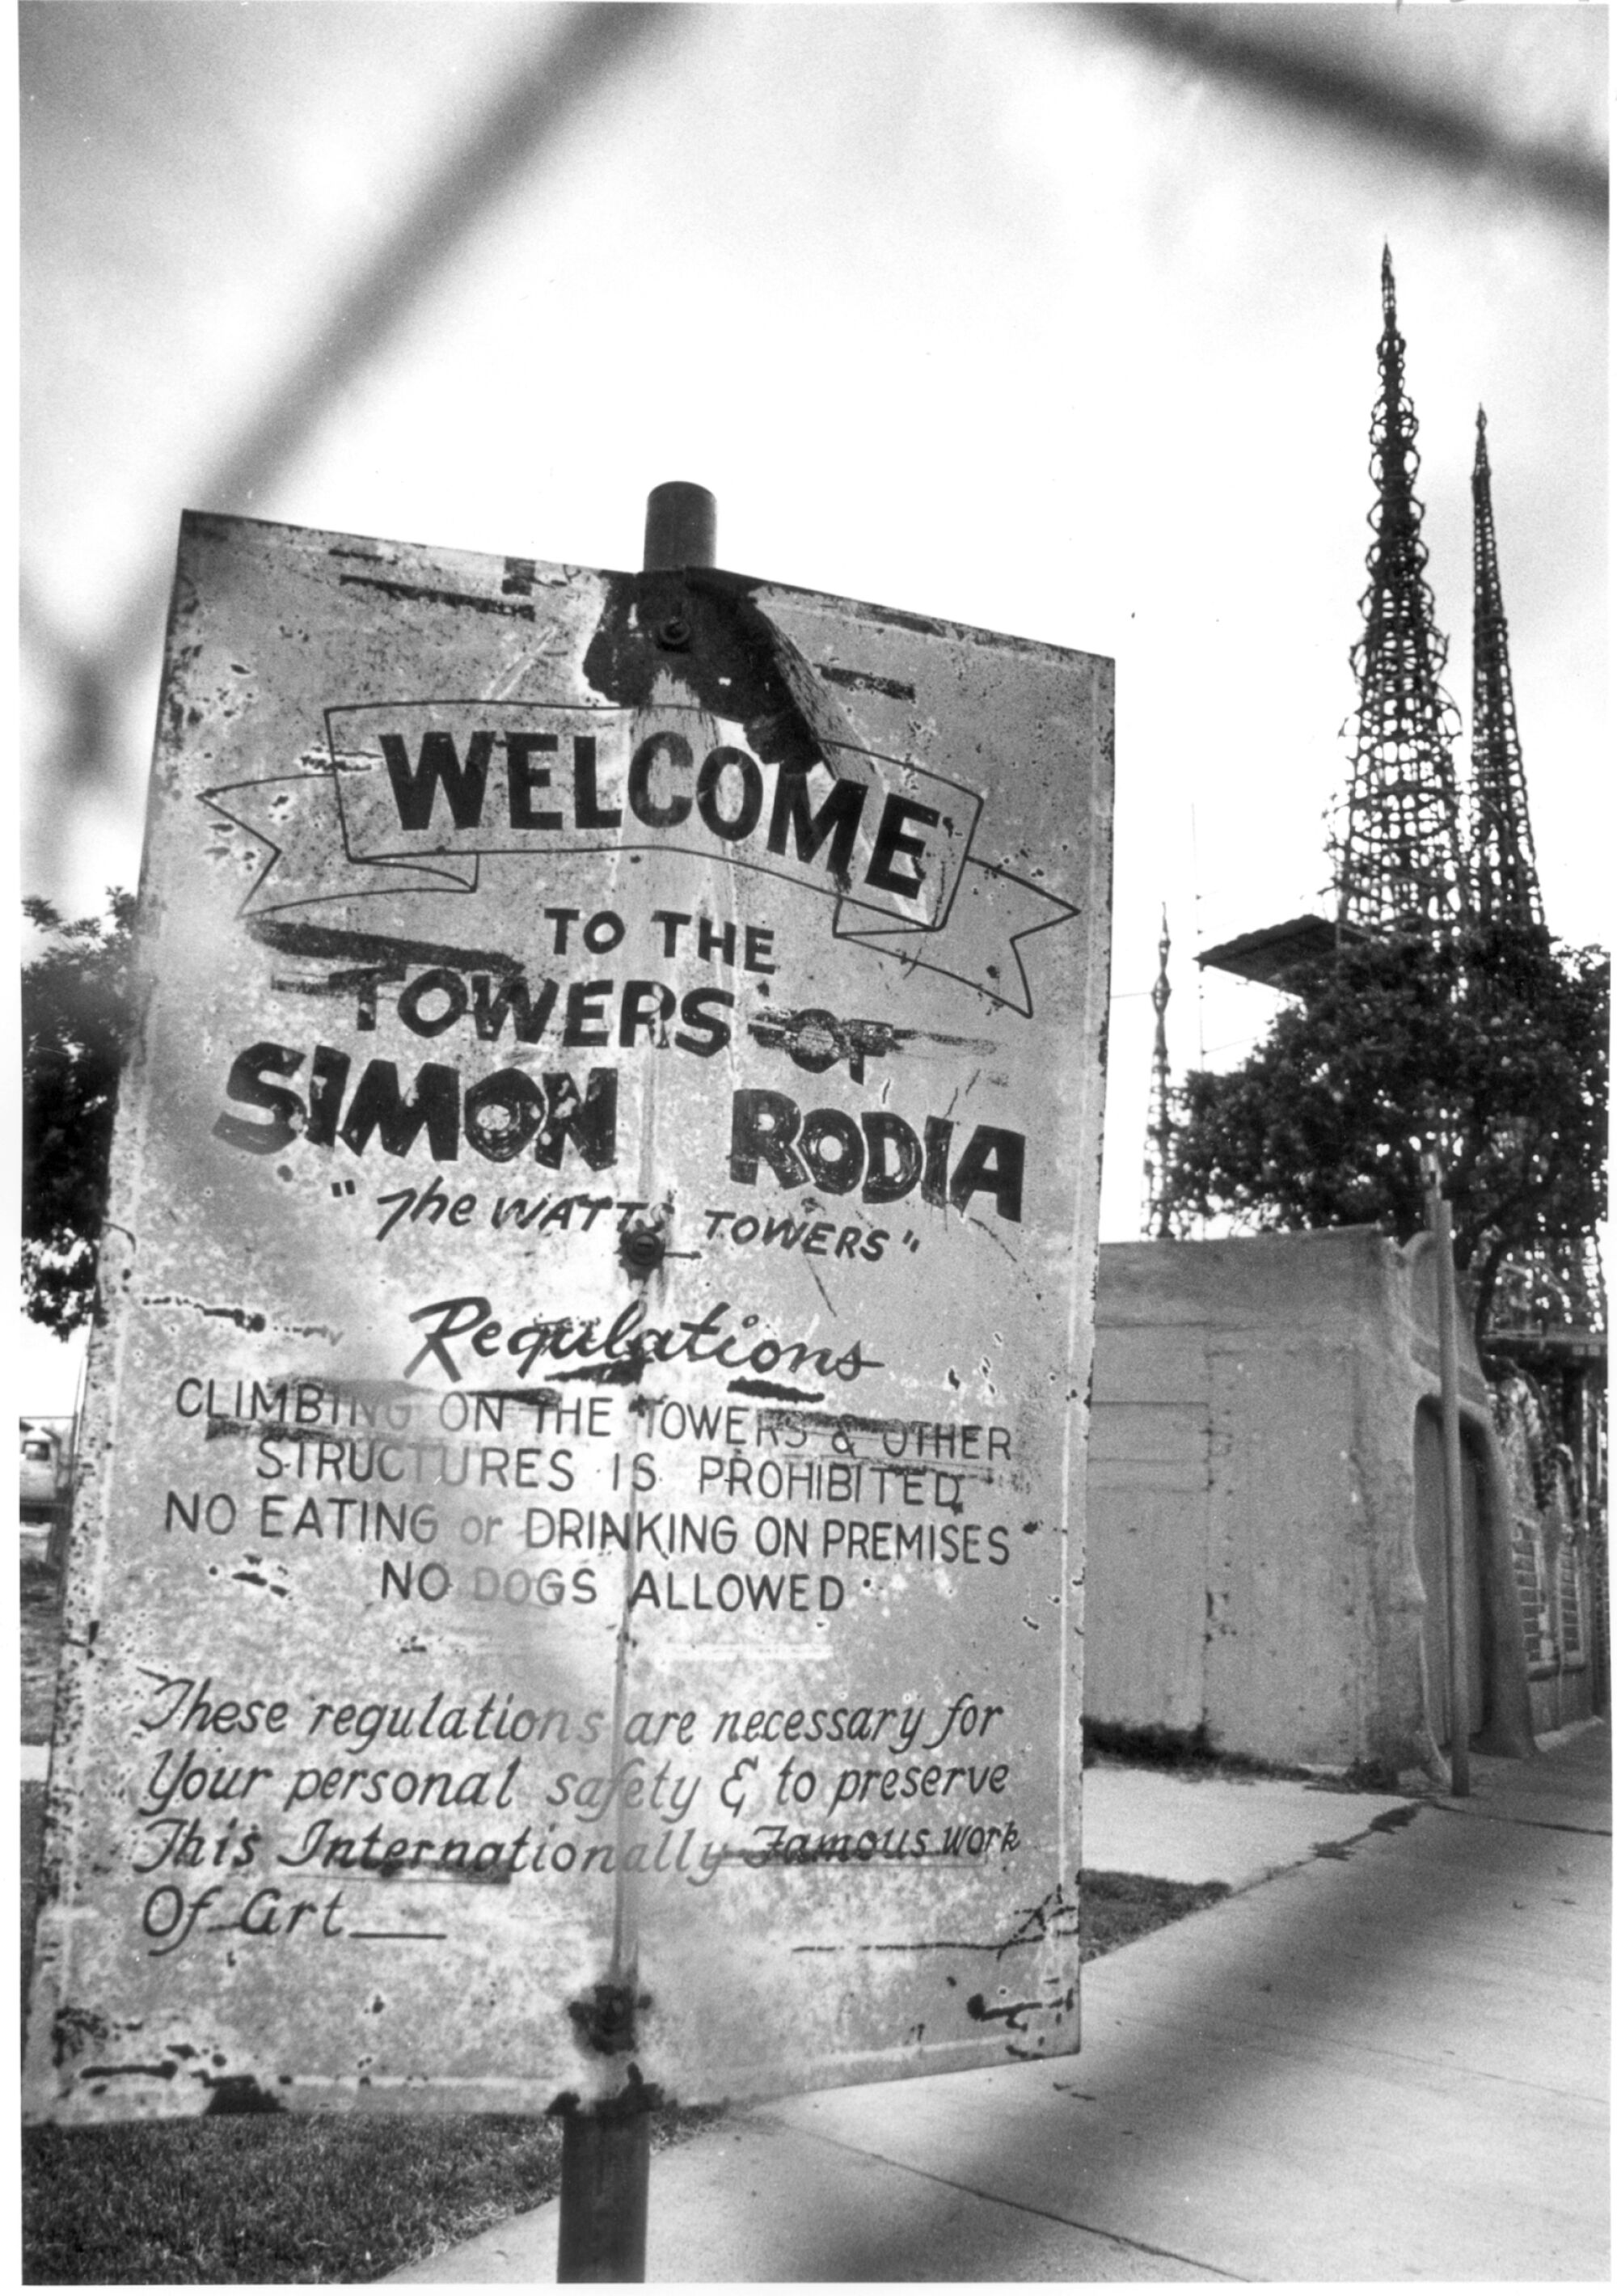 A rusted sign reading "Welcome to the Towers of Simon Rodia" with metal towers in the background